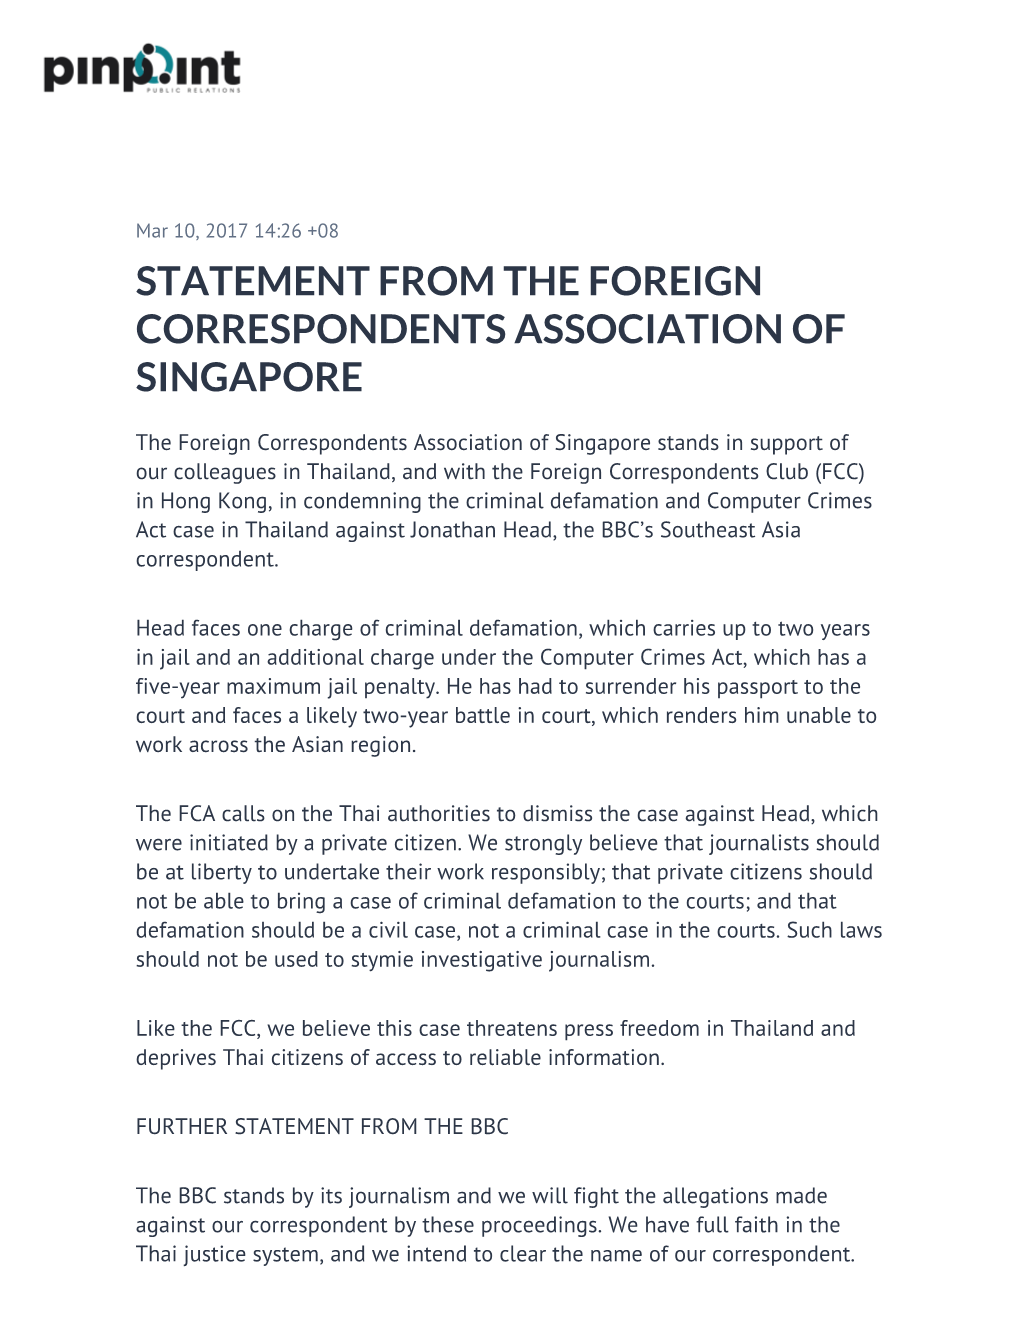 Statement from the Foreign Correspondents Association of Singapore